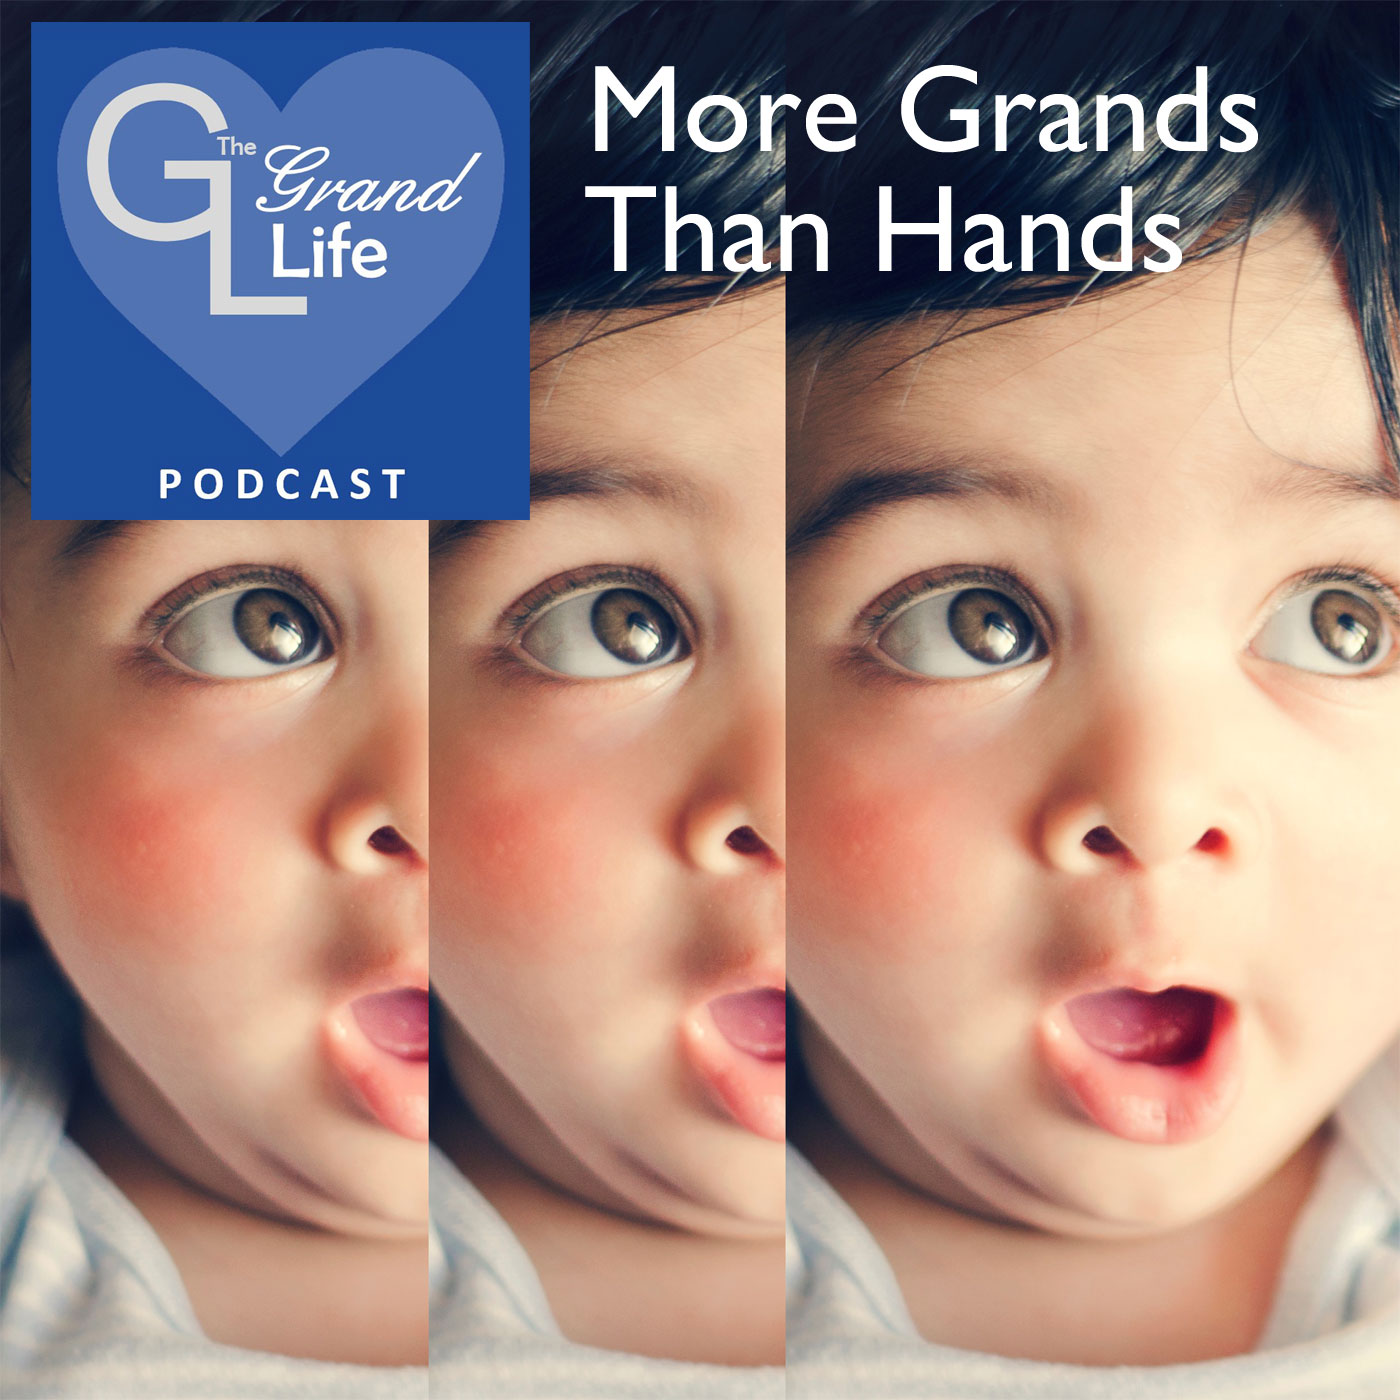 More Grands Than Hands